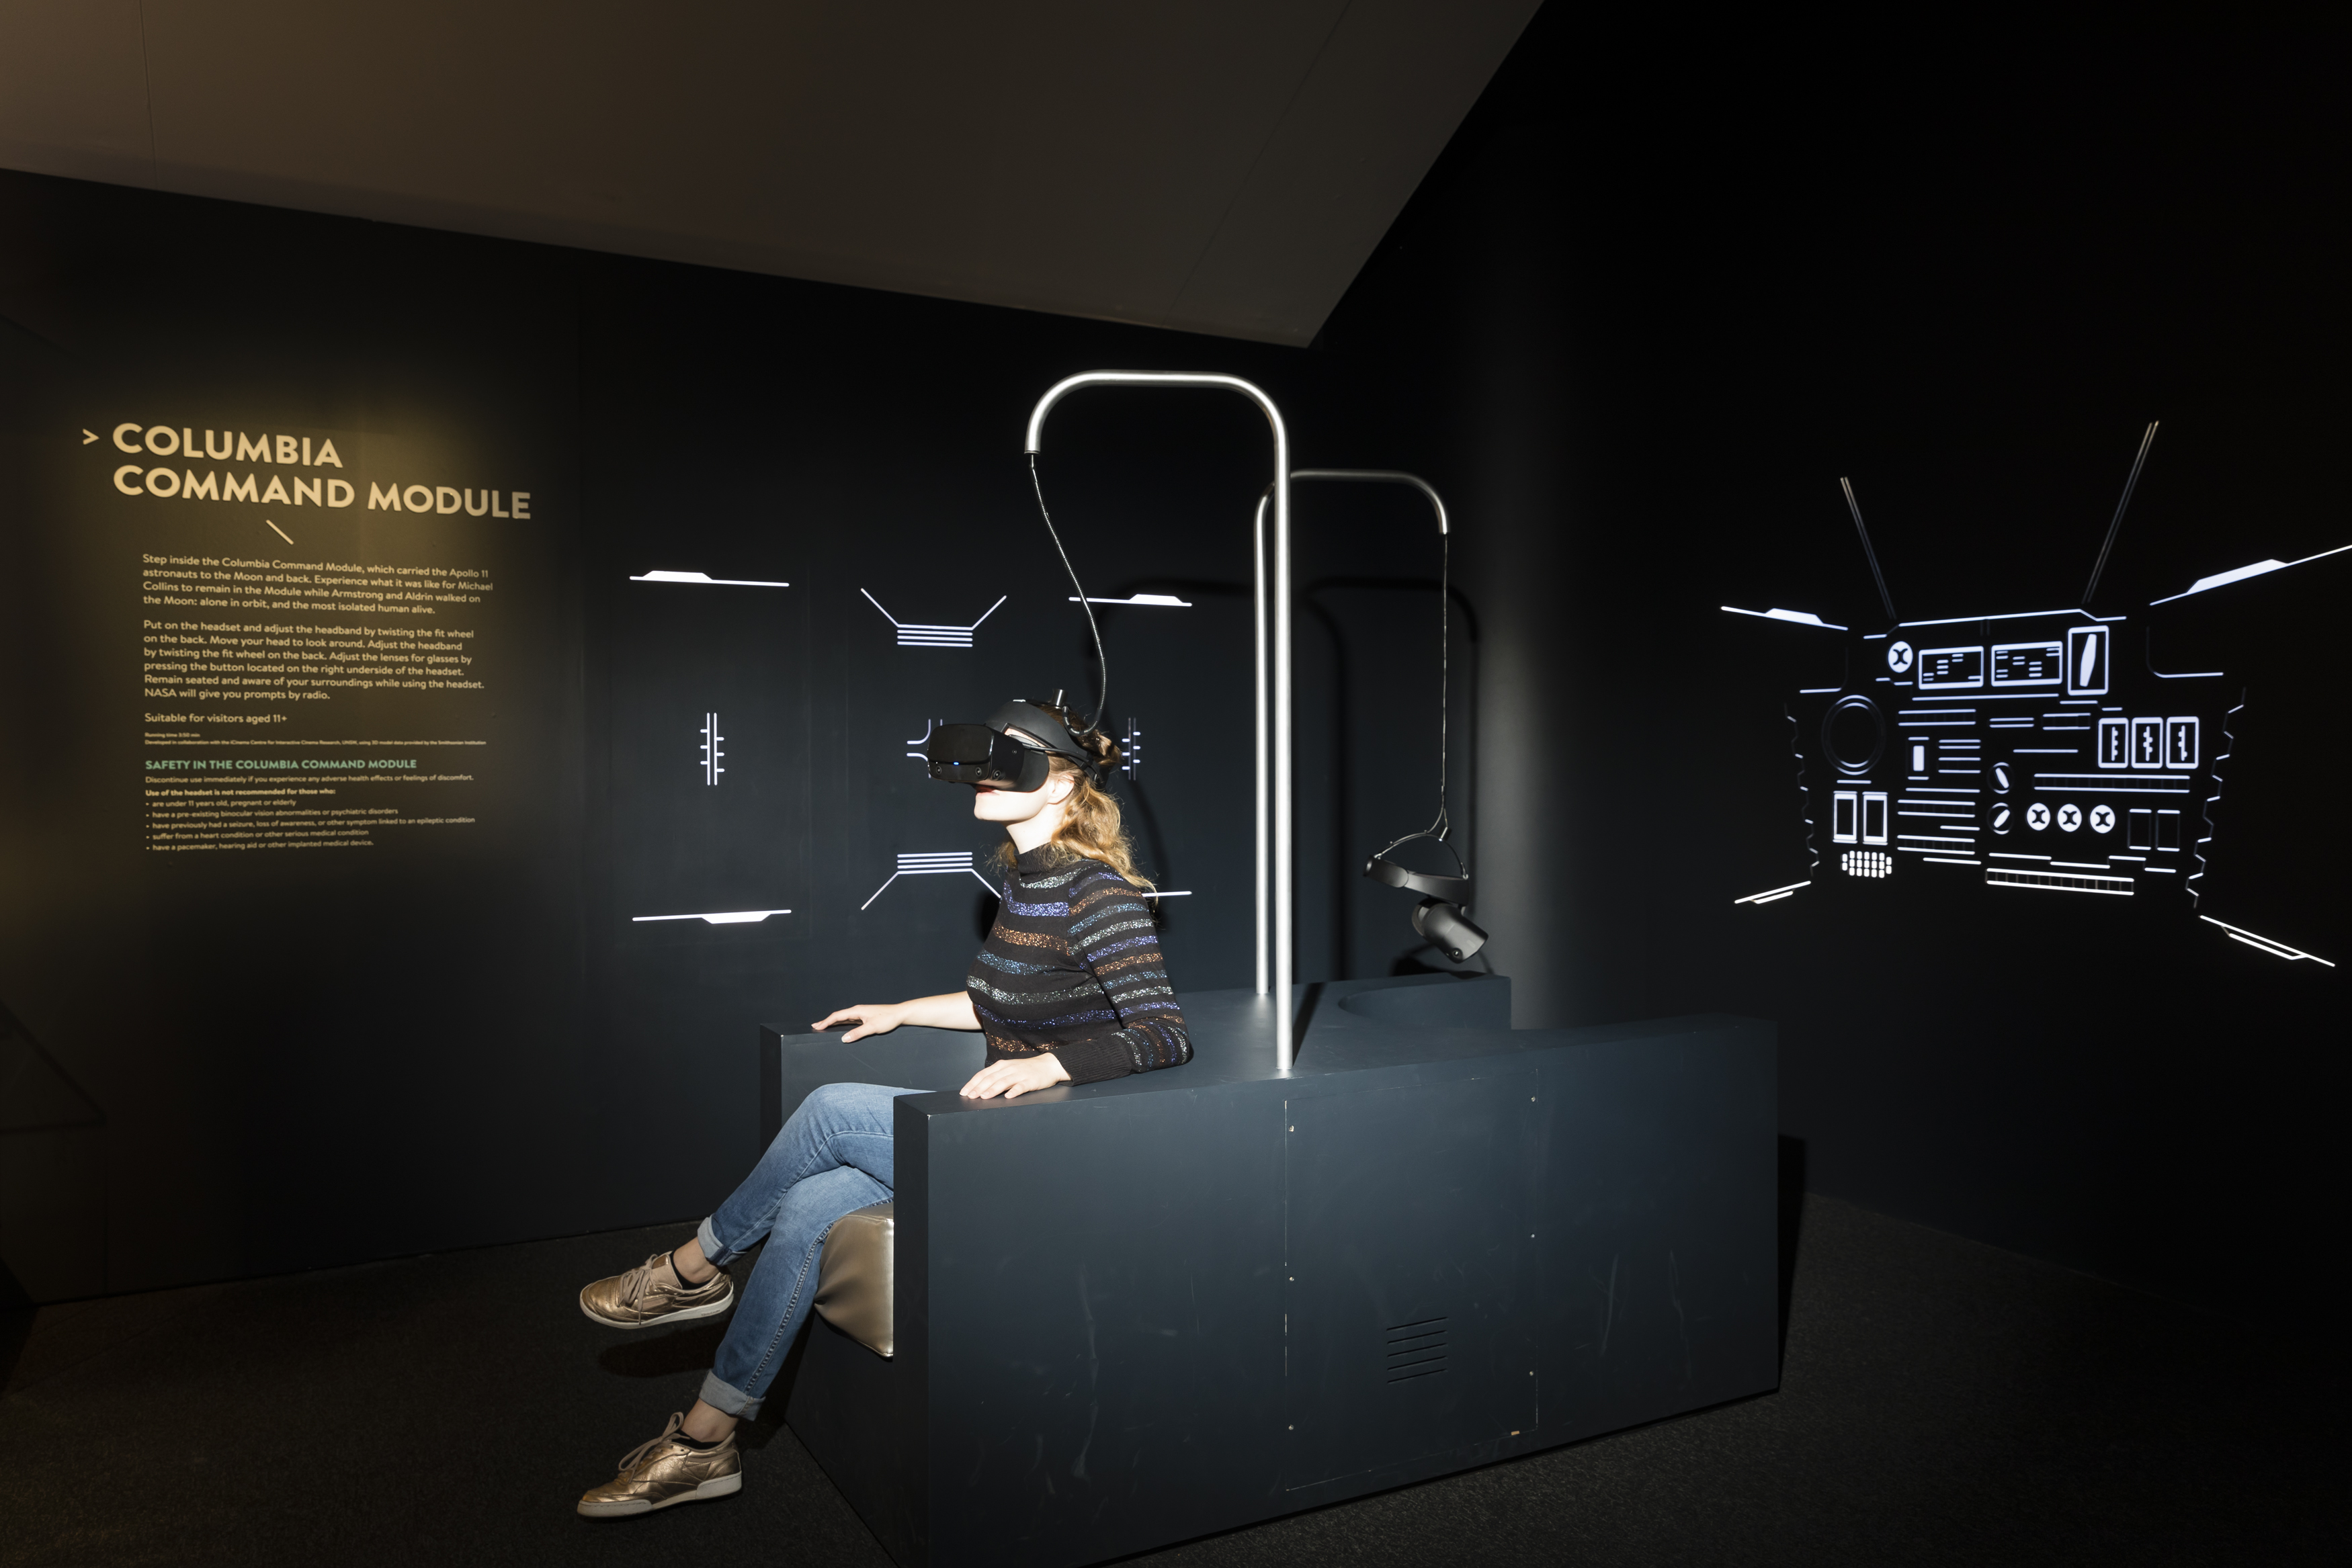 Dark nook with two seats built back-to-back. Above each seat dangles a VR headset attached to a metal pole. A woman sits in one seat wearing the headset. On the walls is an instructional text panel and backlit schematics of the Columbia control panels.